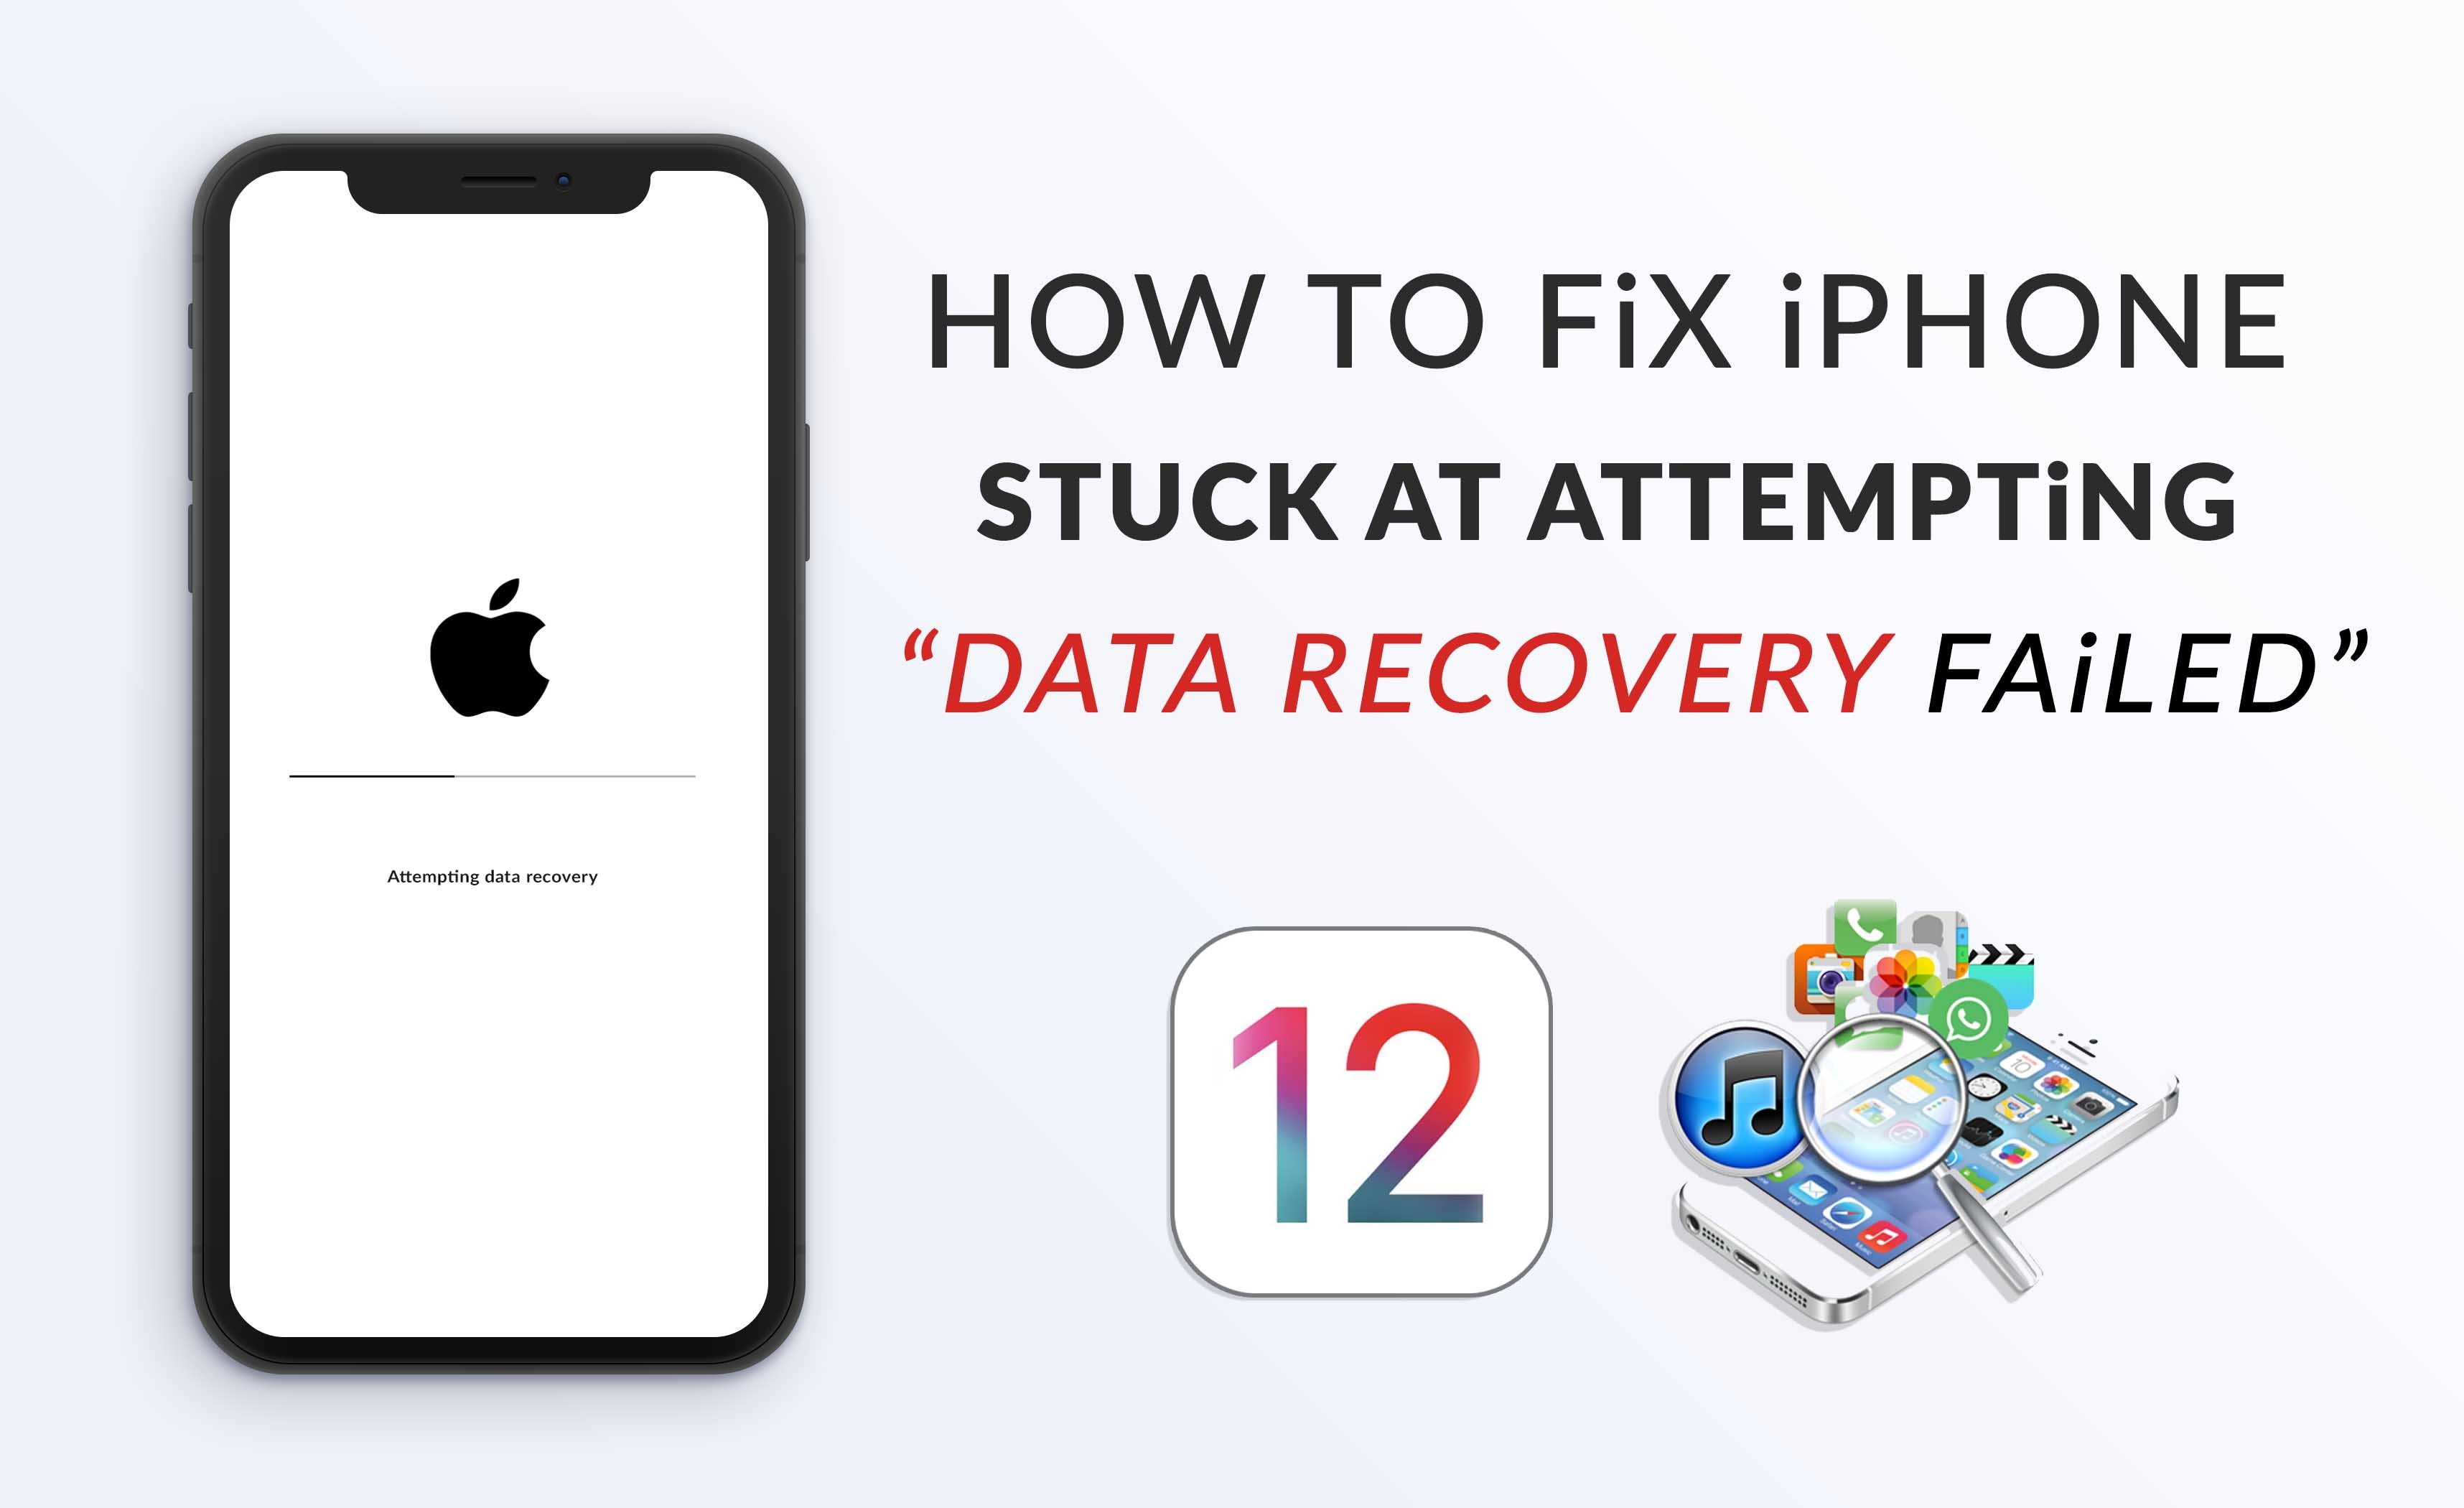 apple iphone data recovery